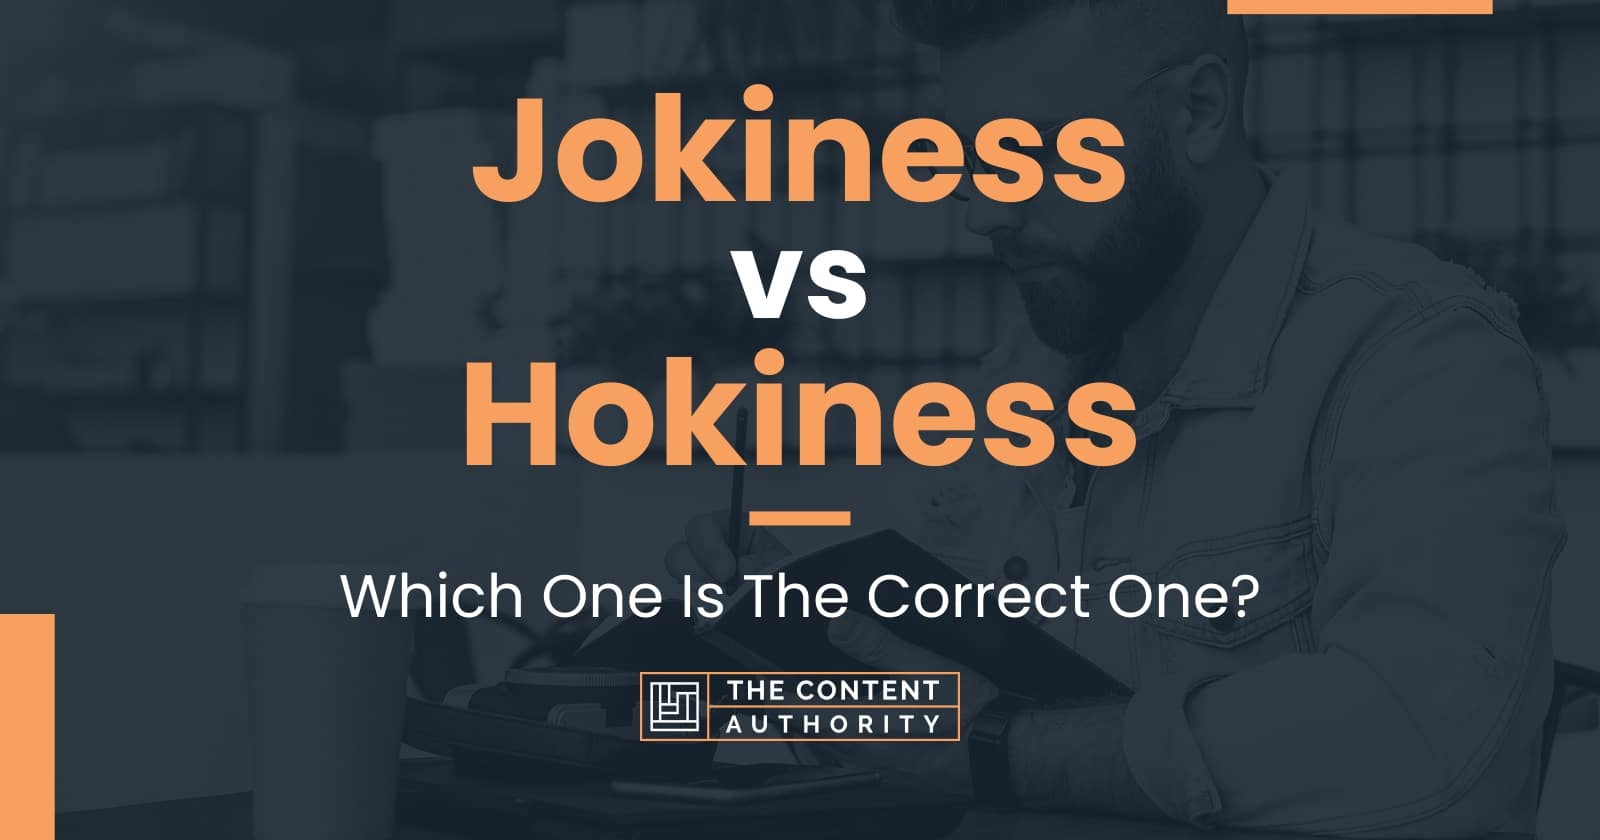 Jokiness vs Hokiness Which One Is The Correct One?